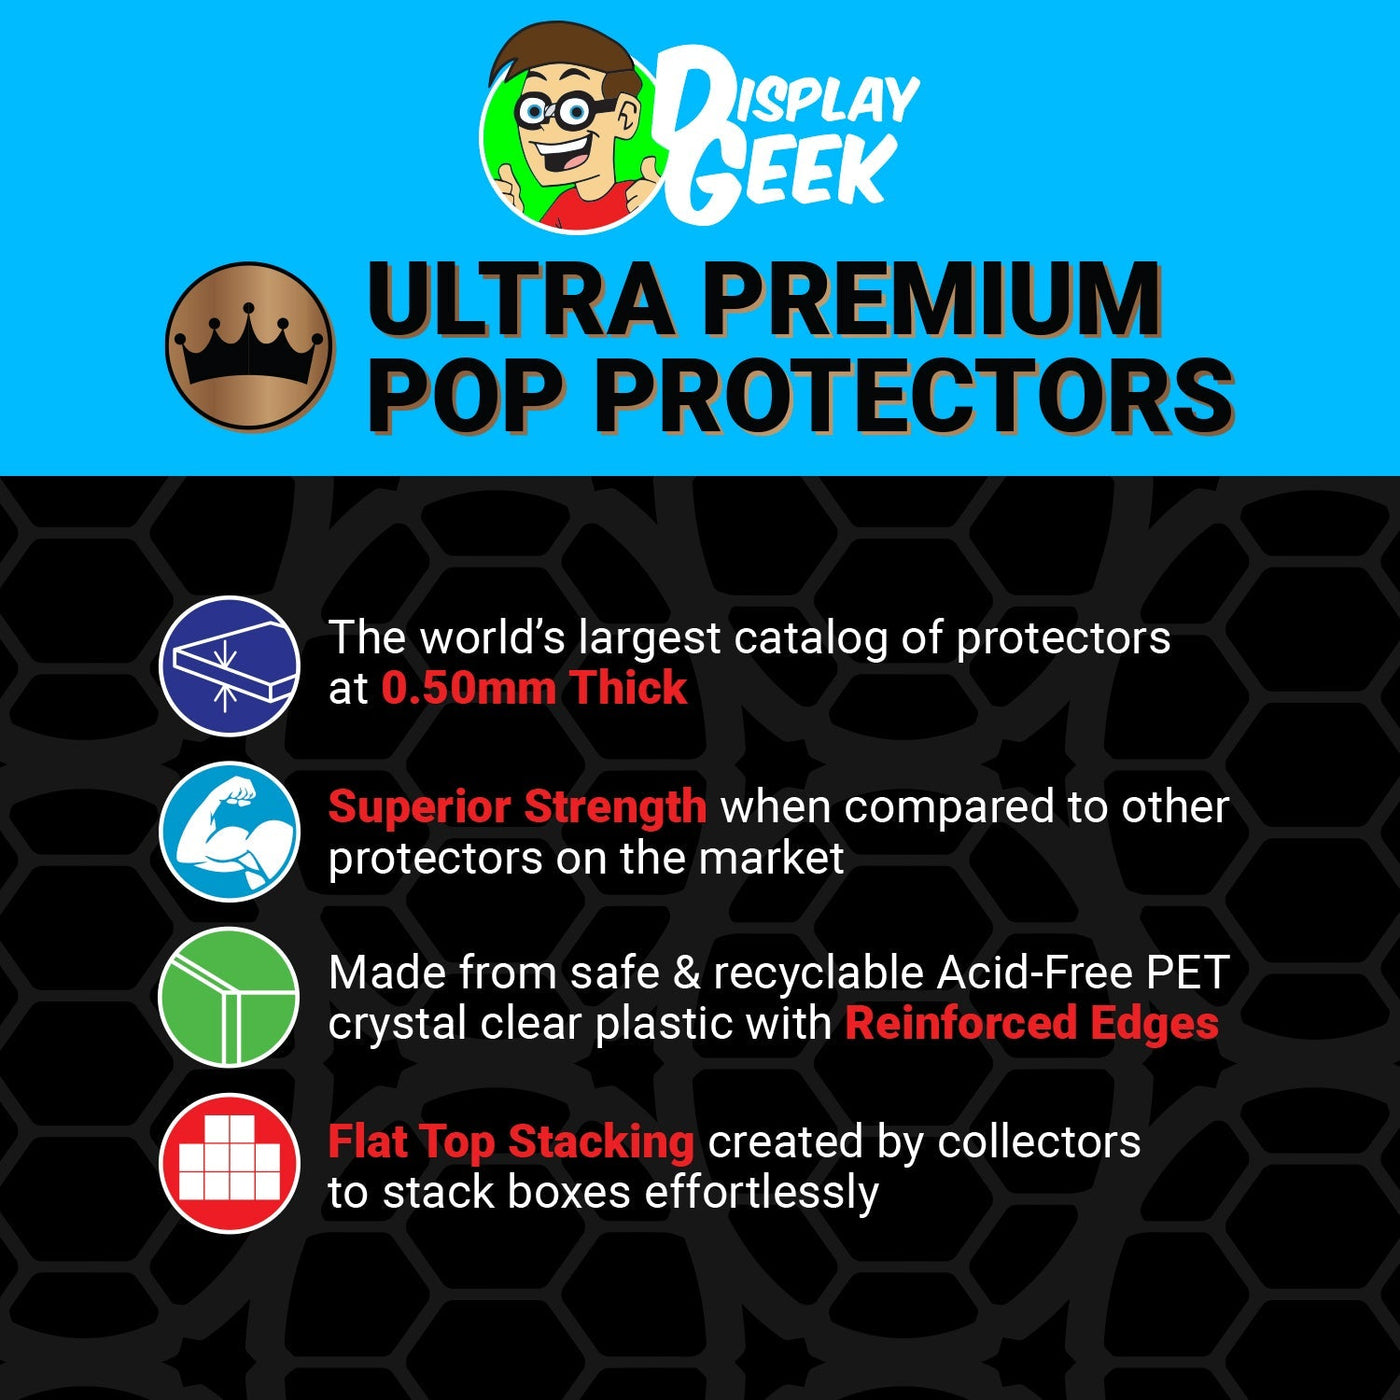 Pop Protector for The Joker Gamer Chase Funko Pop Pez on The Protector Guide App by Display Geek